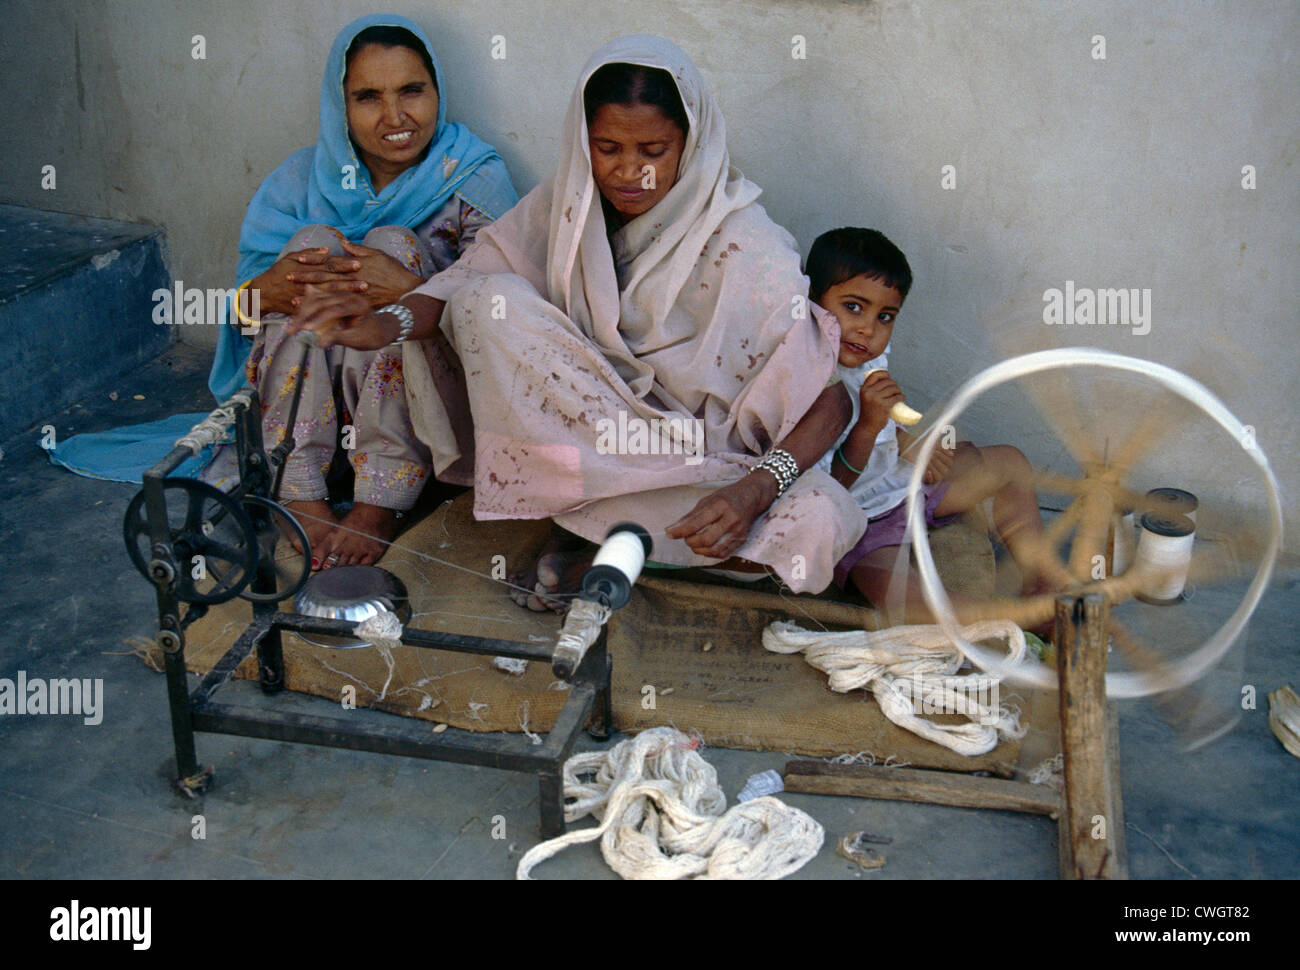 Jaipur India Leper Community Woman Spinning Cotton For Weaving Stock Photo